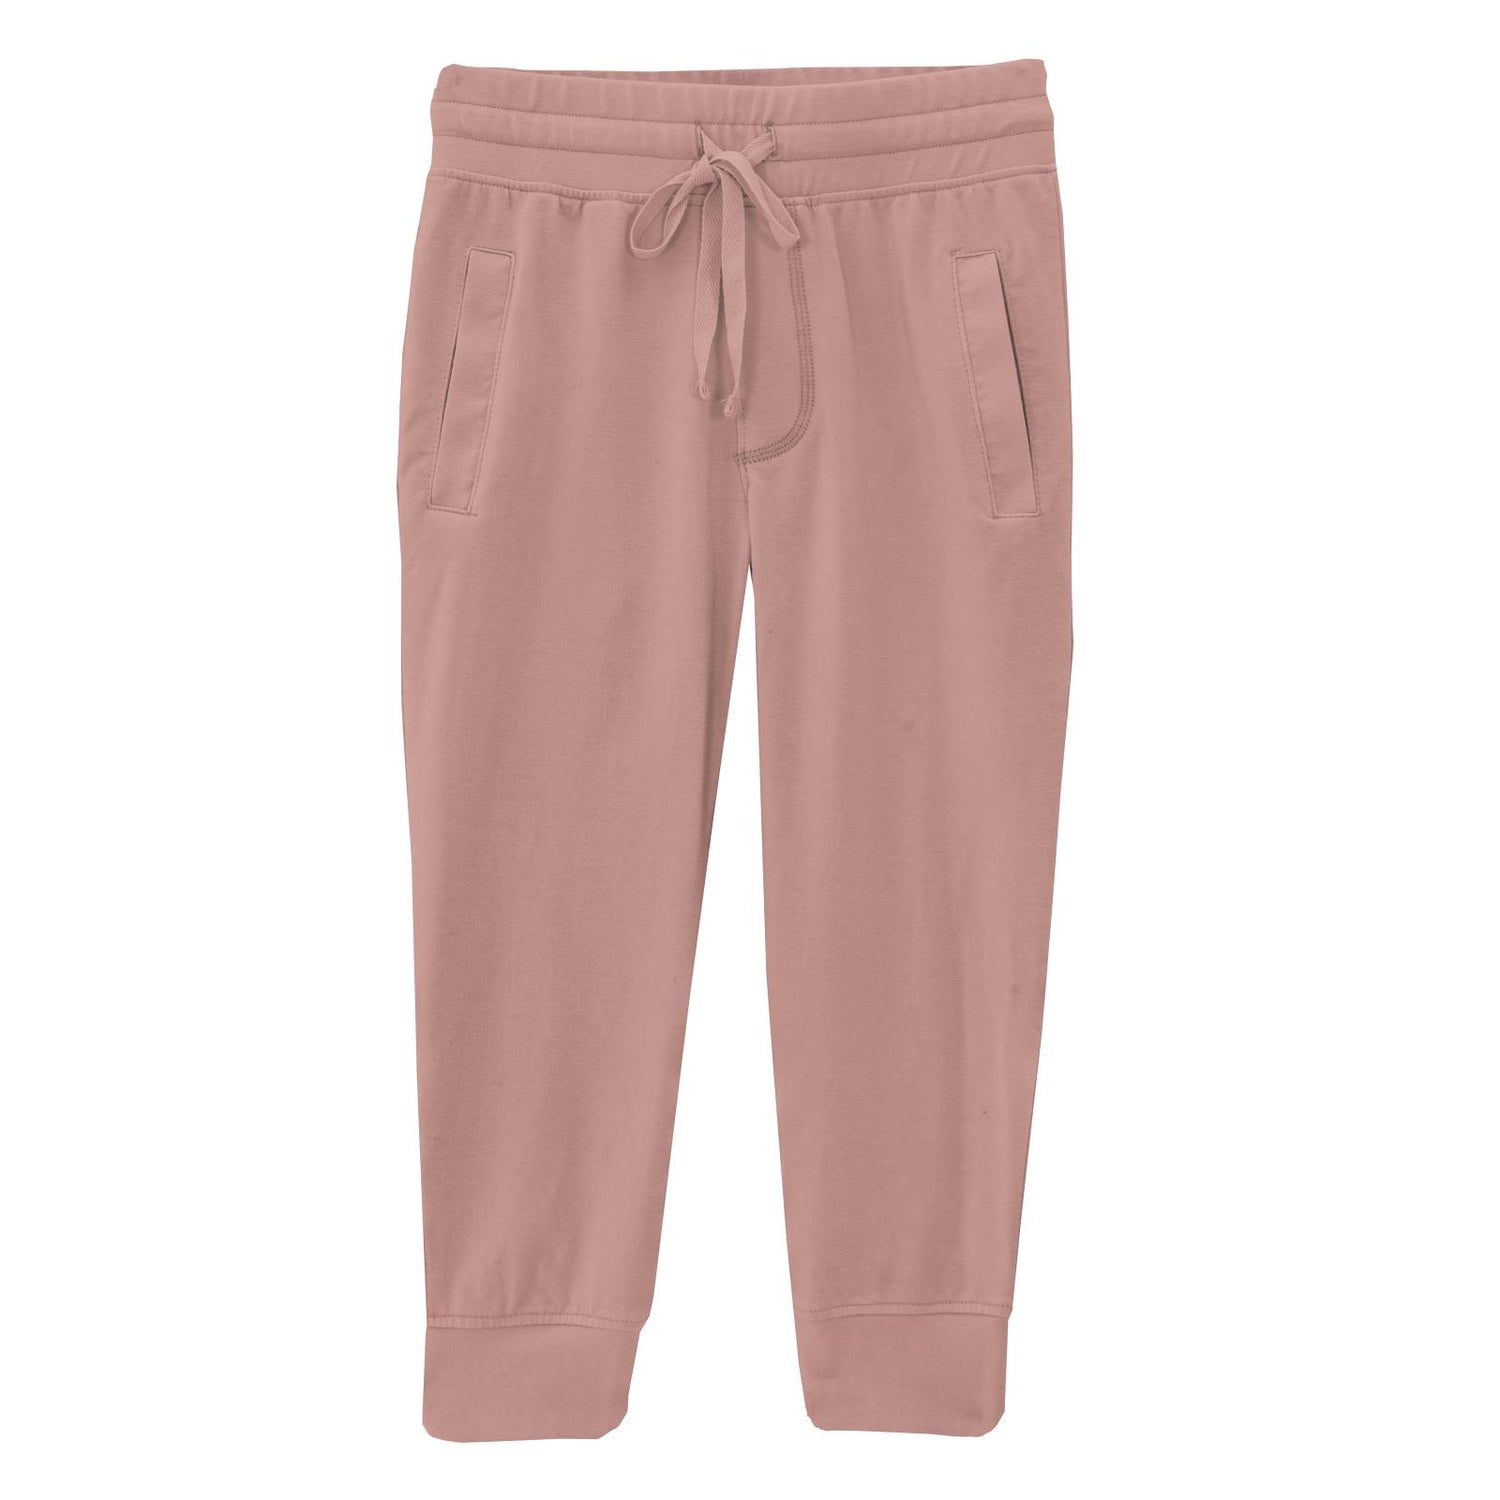 Luxe Athletic Joggers in Blush